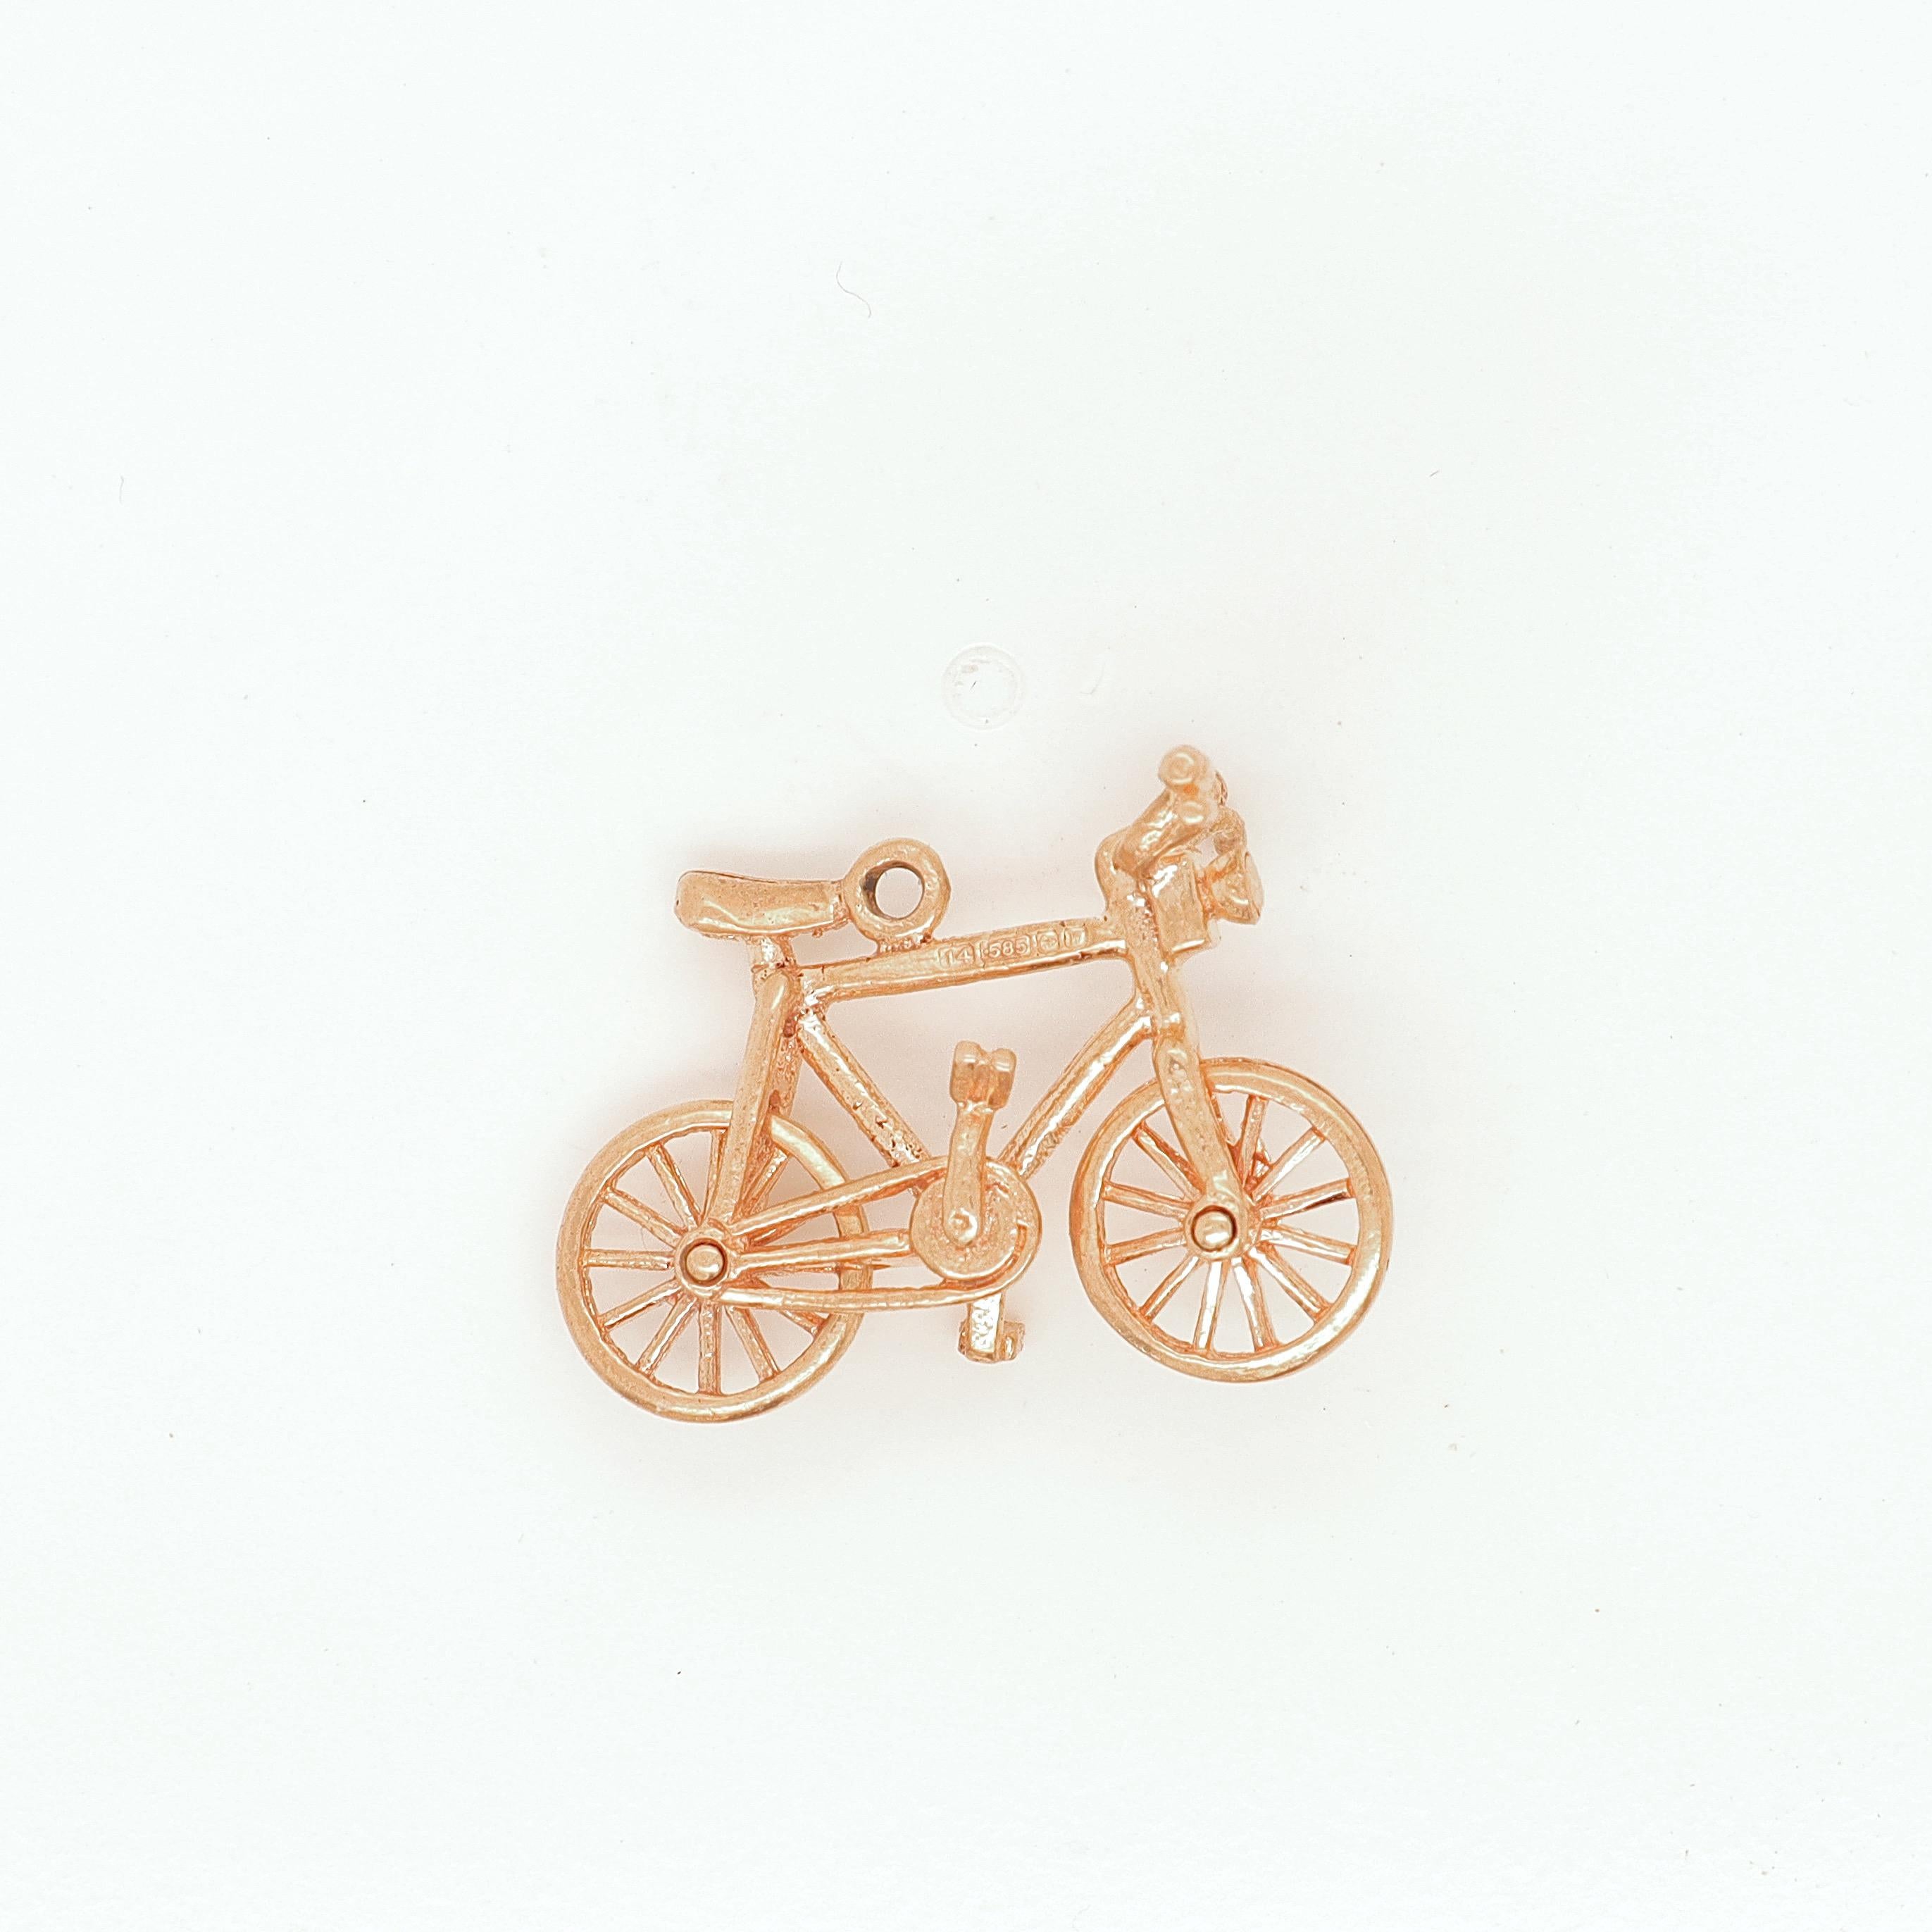 Vintage 14K Gold Figural Bicycle Charm for a Bracelet In Good Condition For Sale In Philadelphia, PA